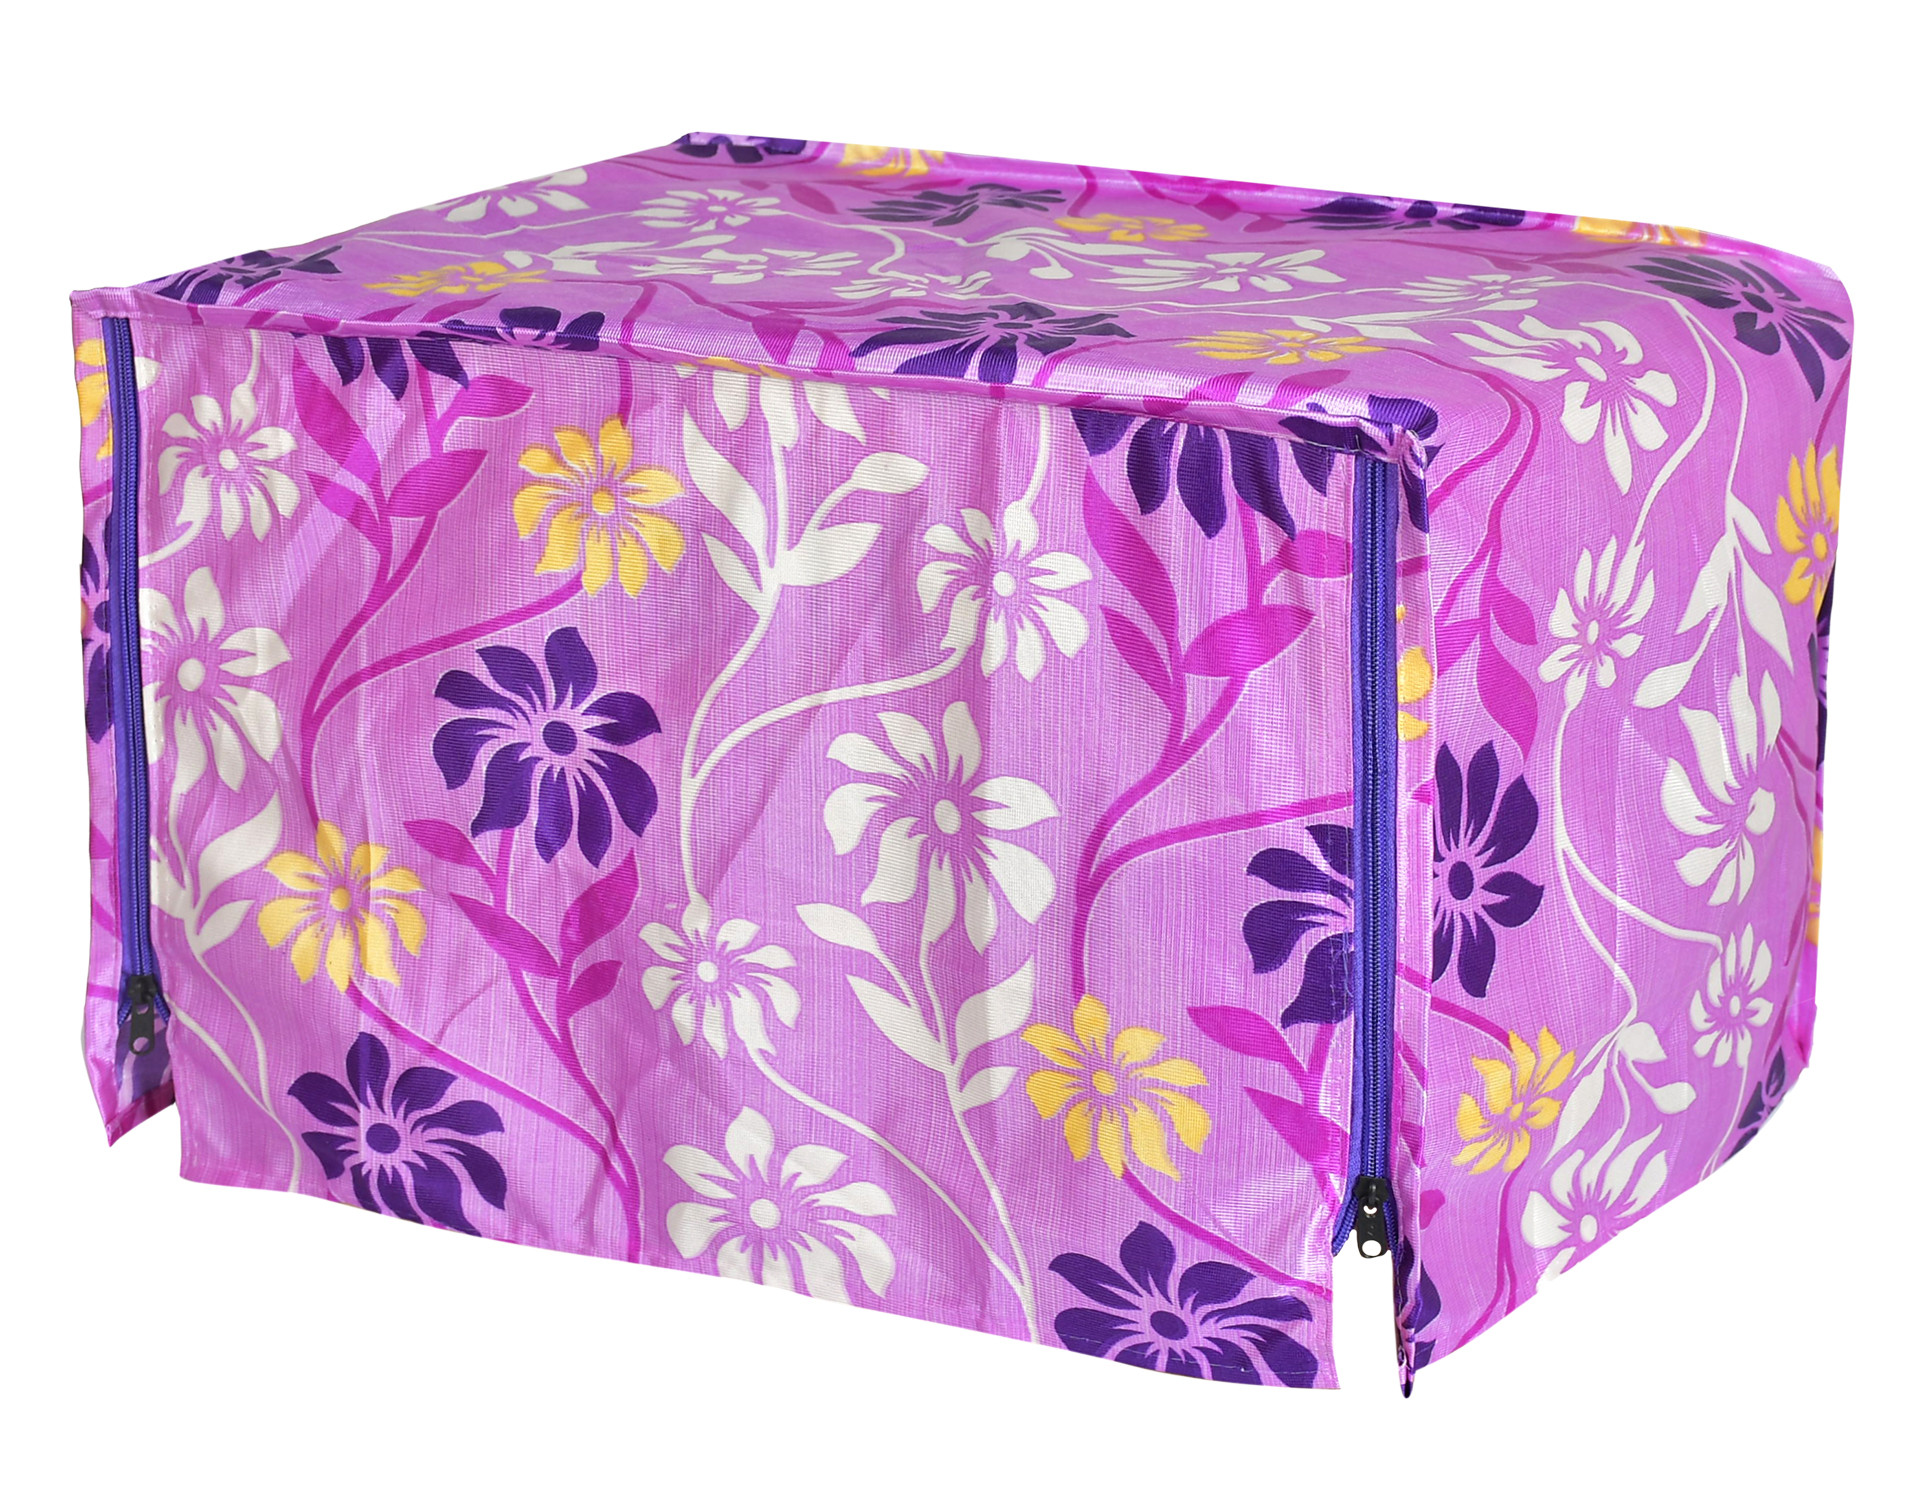 Kuber Industries Polyster Flower Printed Microwave Oven Cover,25 Ltr. (Pink)-HS43KUBMART25909